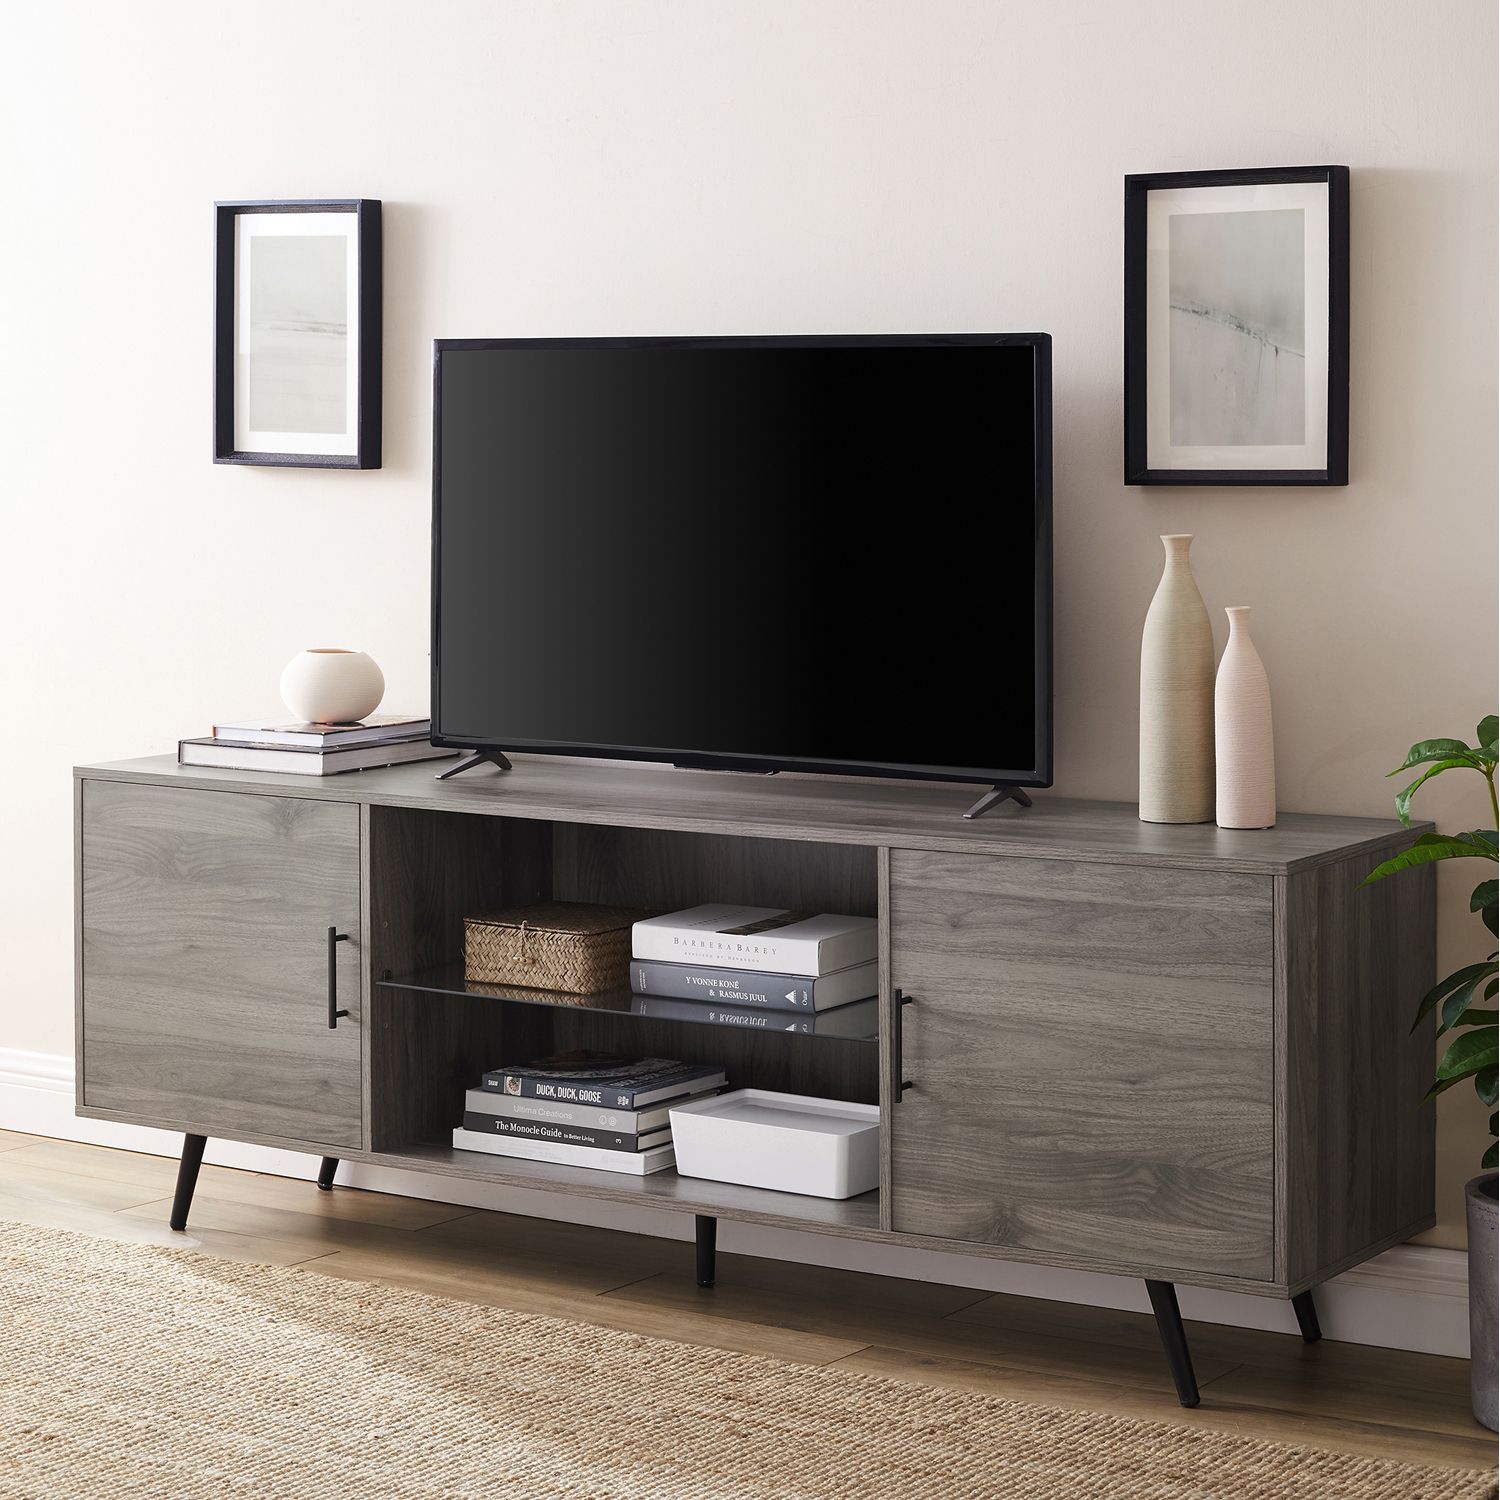 Wide Tv Stand With Glass Shelf – Pier1 With Regard To Greenwich Wide Tv Stands (View 3 of 15)